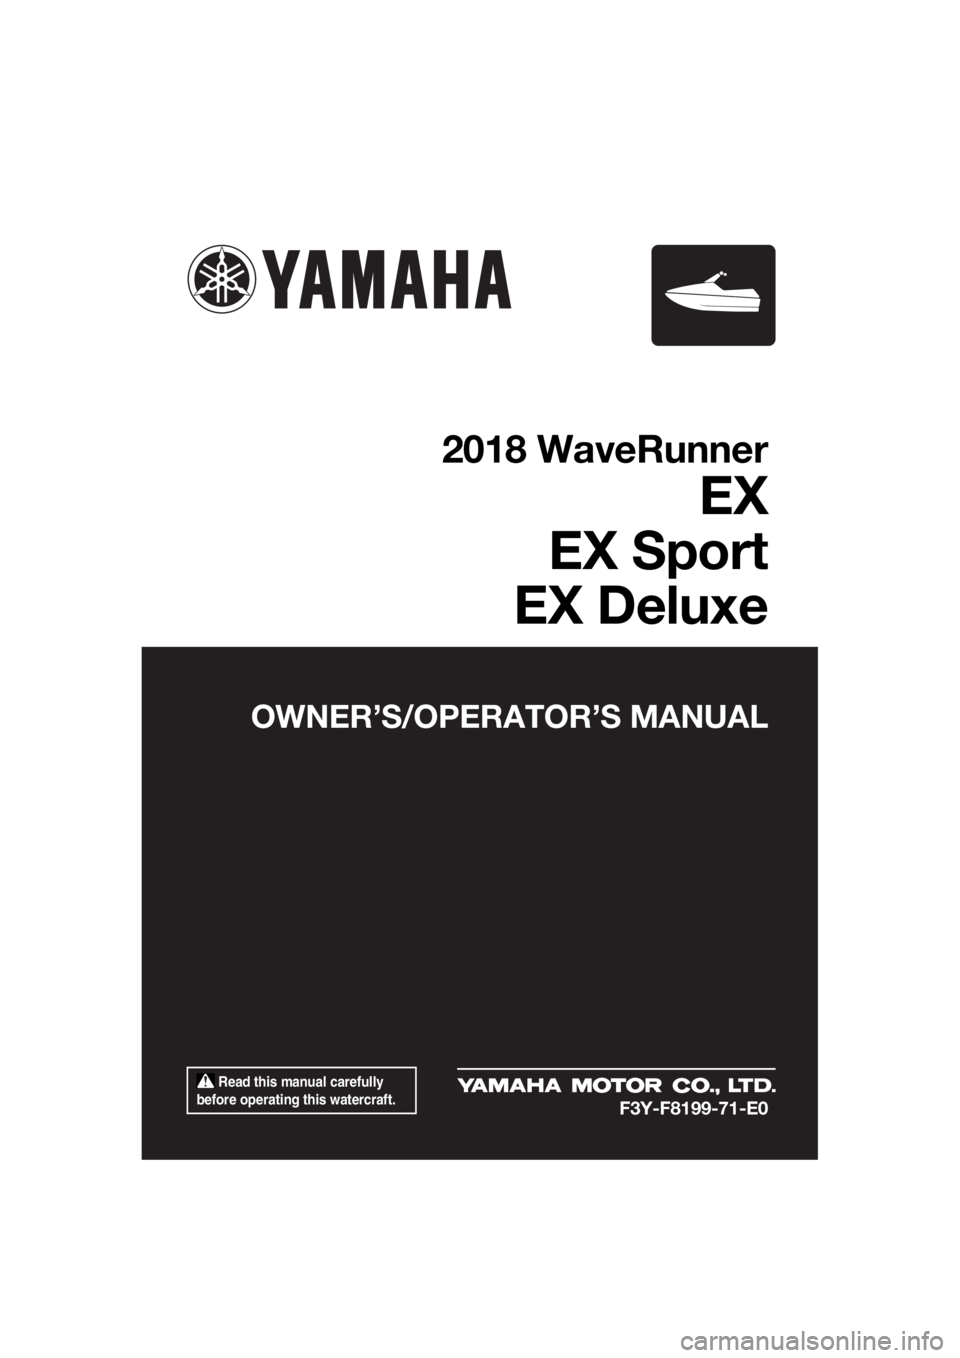 YAMAHA EX SPORT 2018  Owners Manual  Read this manual carefully 
before operating this watercraft.
OWNER’S/OPERATOR’S MANUAL
2018 WaveRunner
EX
EX Sport
EX Deluxe
F3Y-F8199-71-E0
UF3Y71E0.book  Page 1  Thursday, May 25, 2017  11:17 